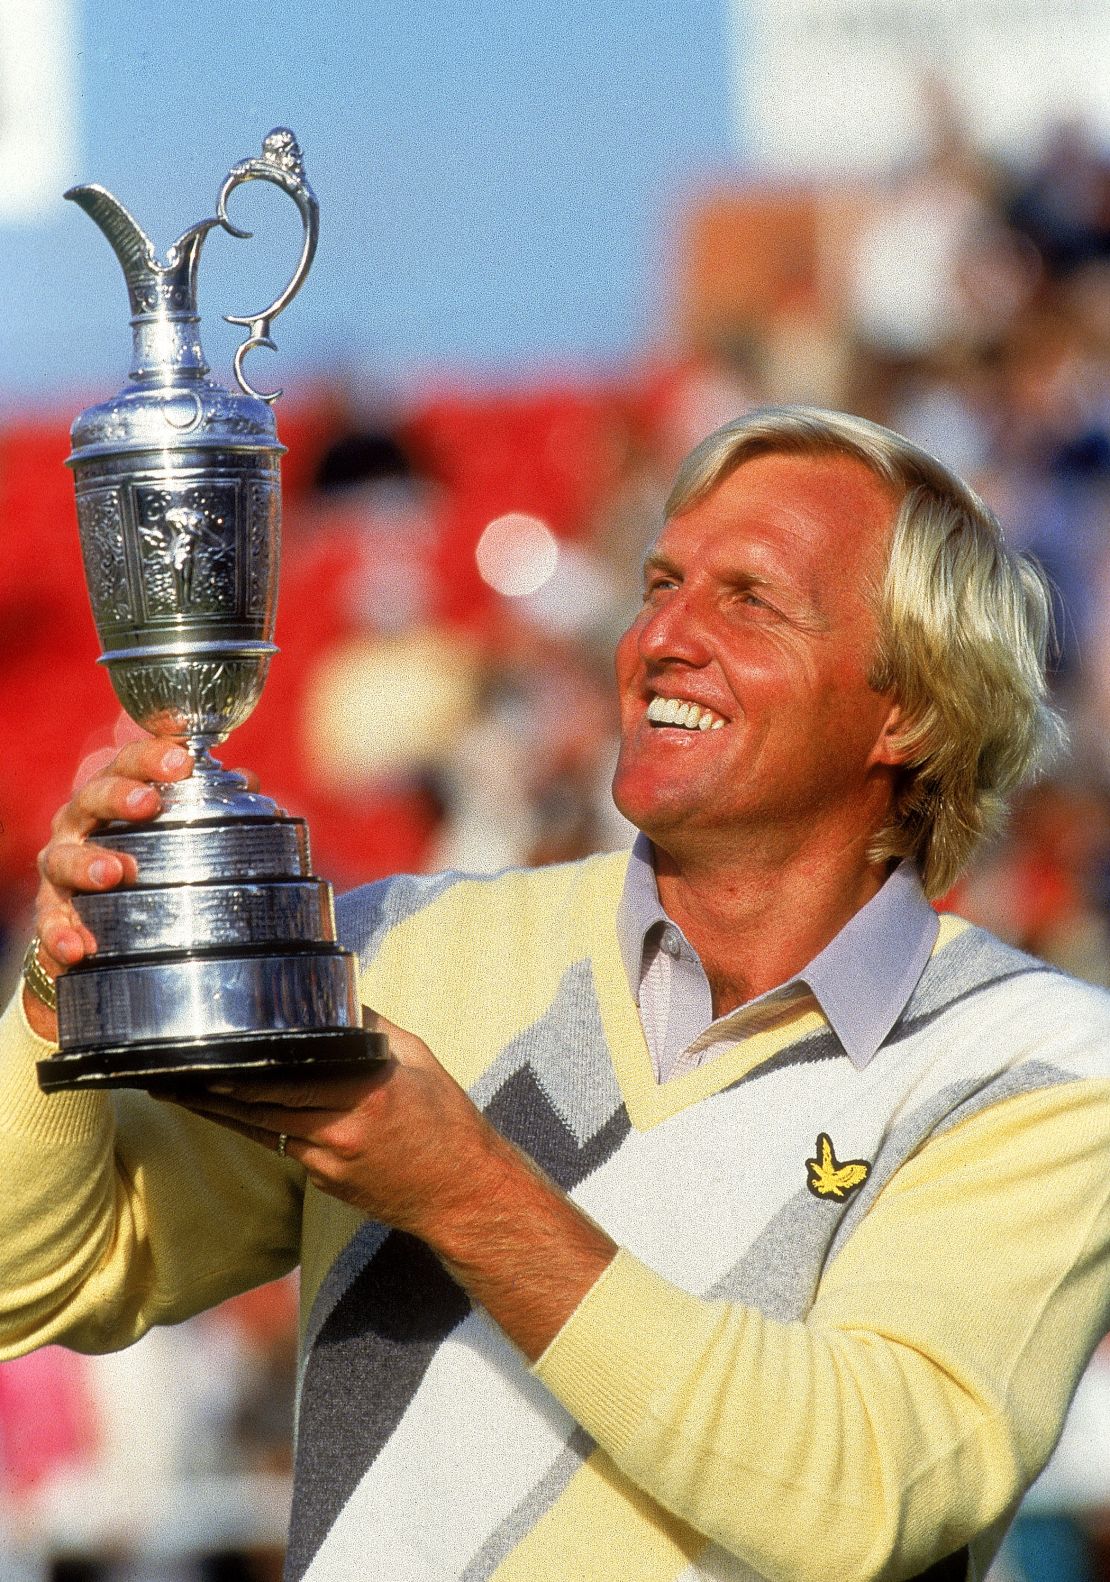 Greg Norman with the claret jug after winning the 1986 British Open.